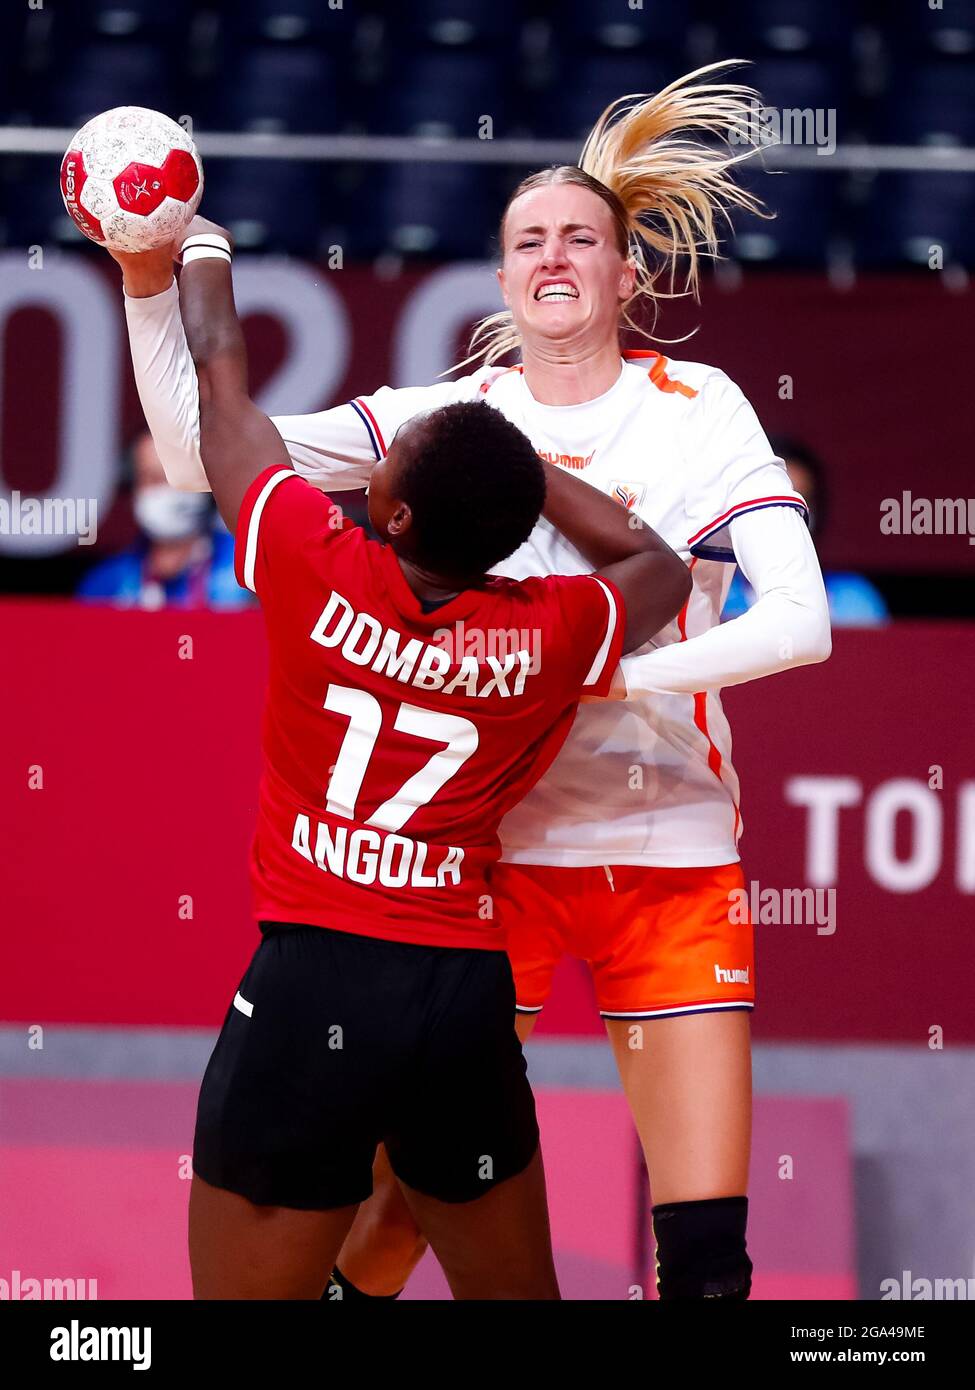 Evaluatie logica Belangrijk nieuws TOKYO, JAPAN - JULY 29: Wuta Dombaxi of Angola and Kelly Dulfer of the  Netherlands during the Tokyo 2020 Olympic Womens Handball Tournament match  between Netherlands and Angola at Yoyogi National Stadium